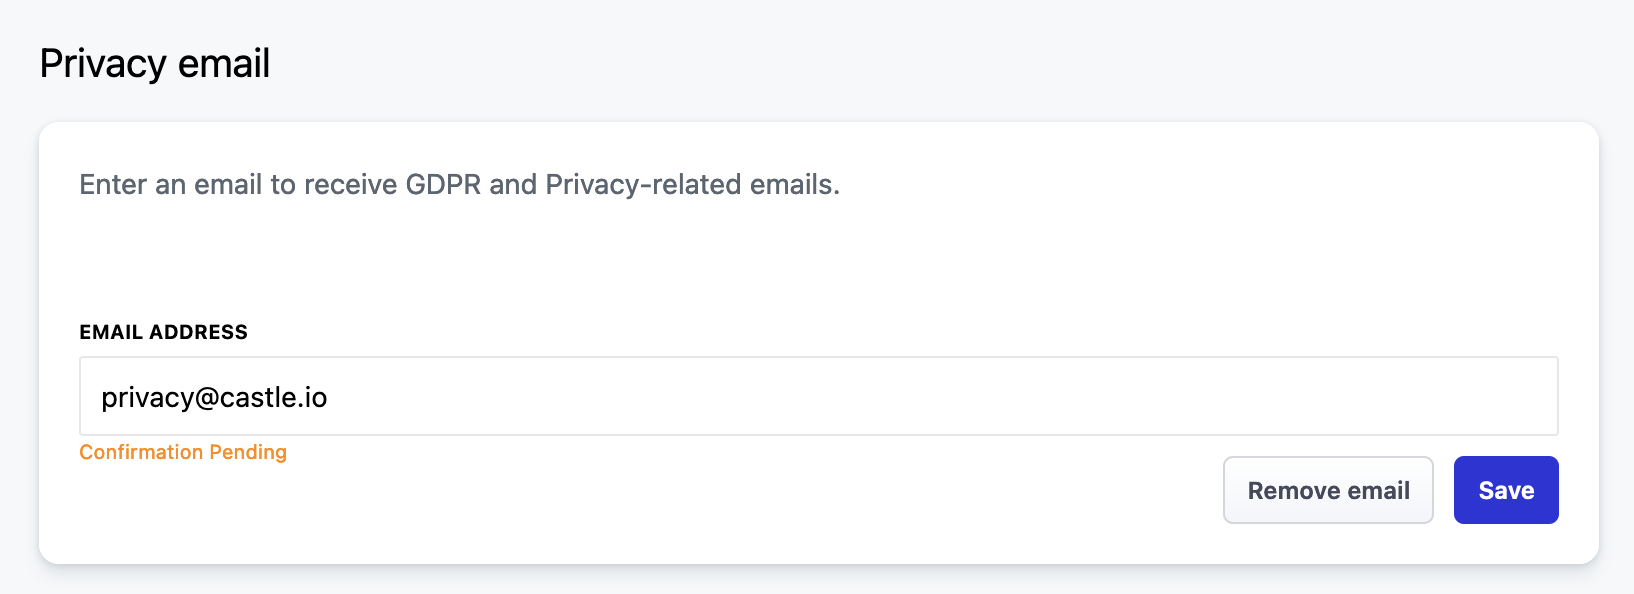 Requests for user data will be processed and sent to the Privacy Email that you have set for that environment in the Castle Dashboard